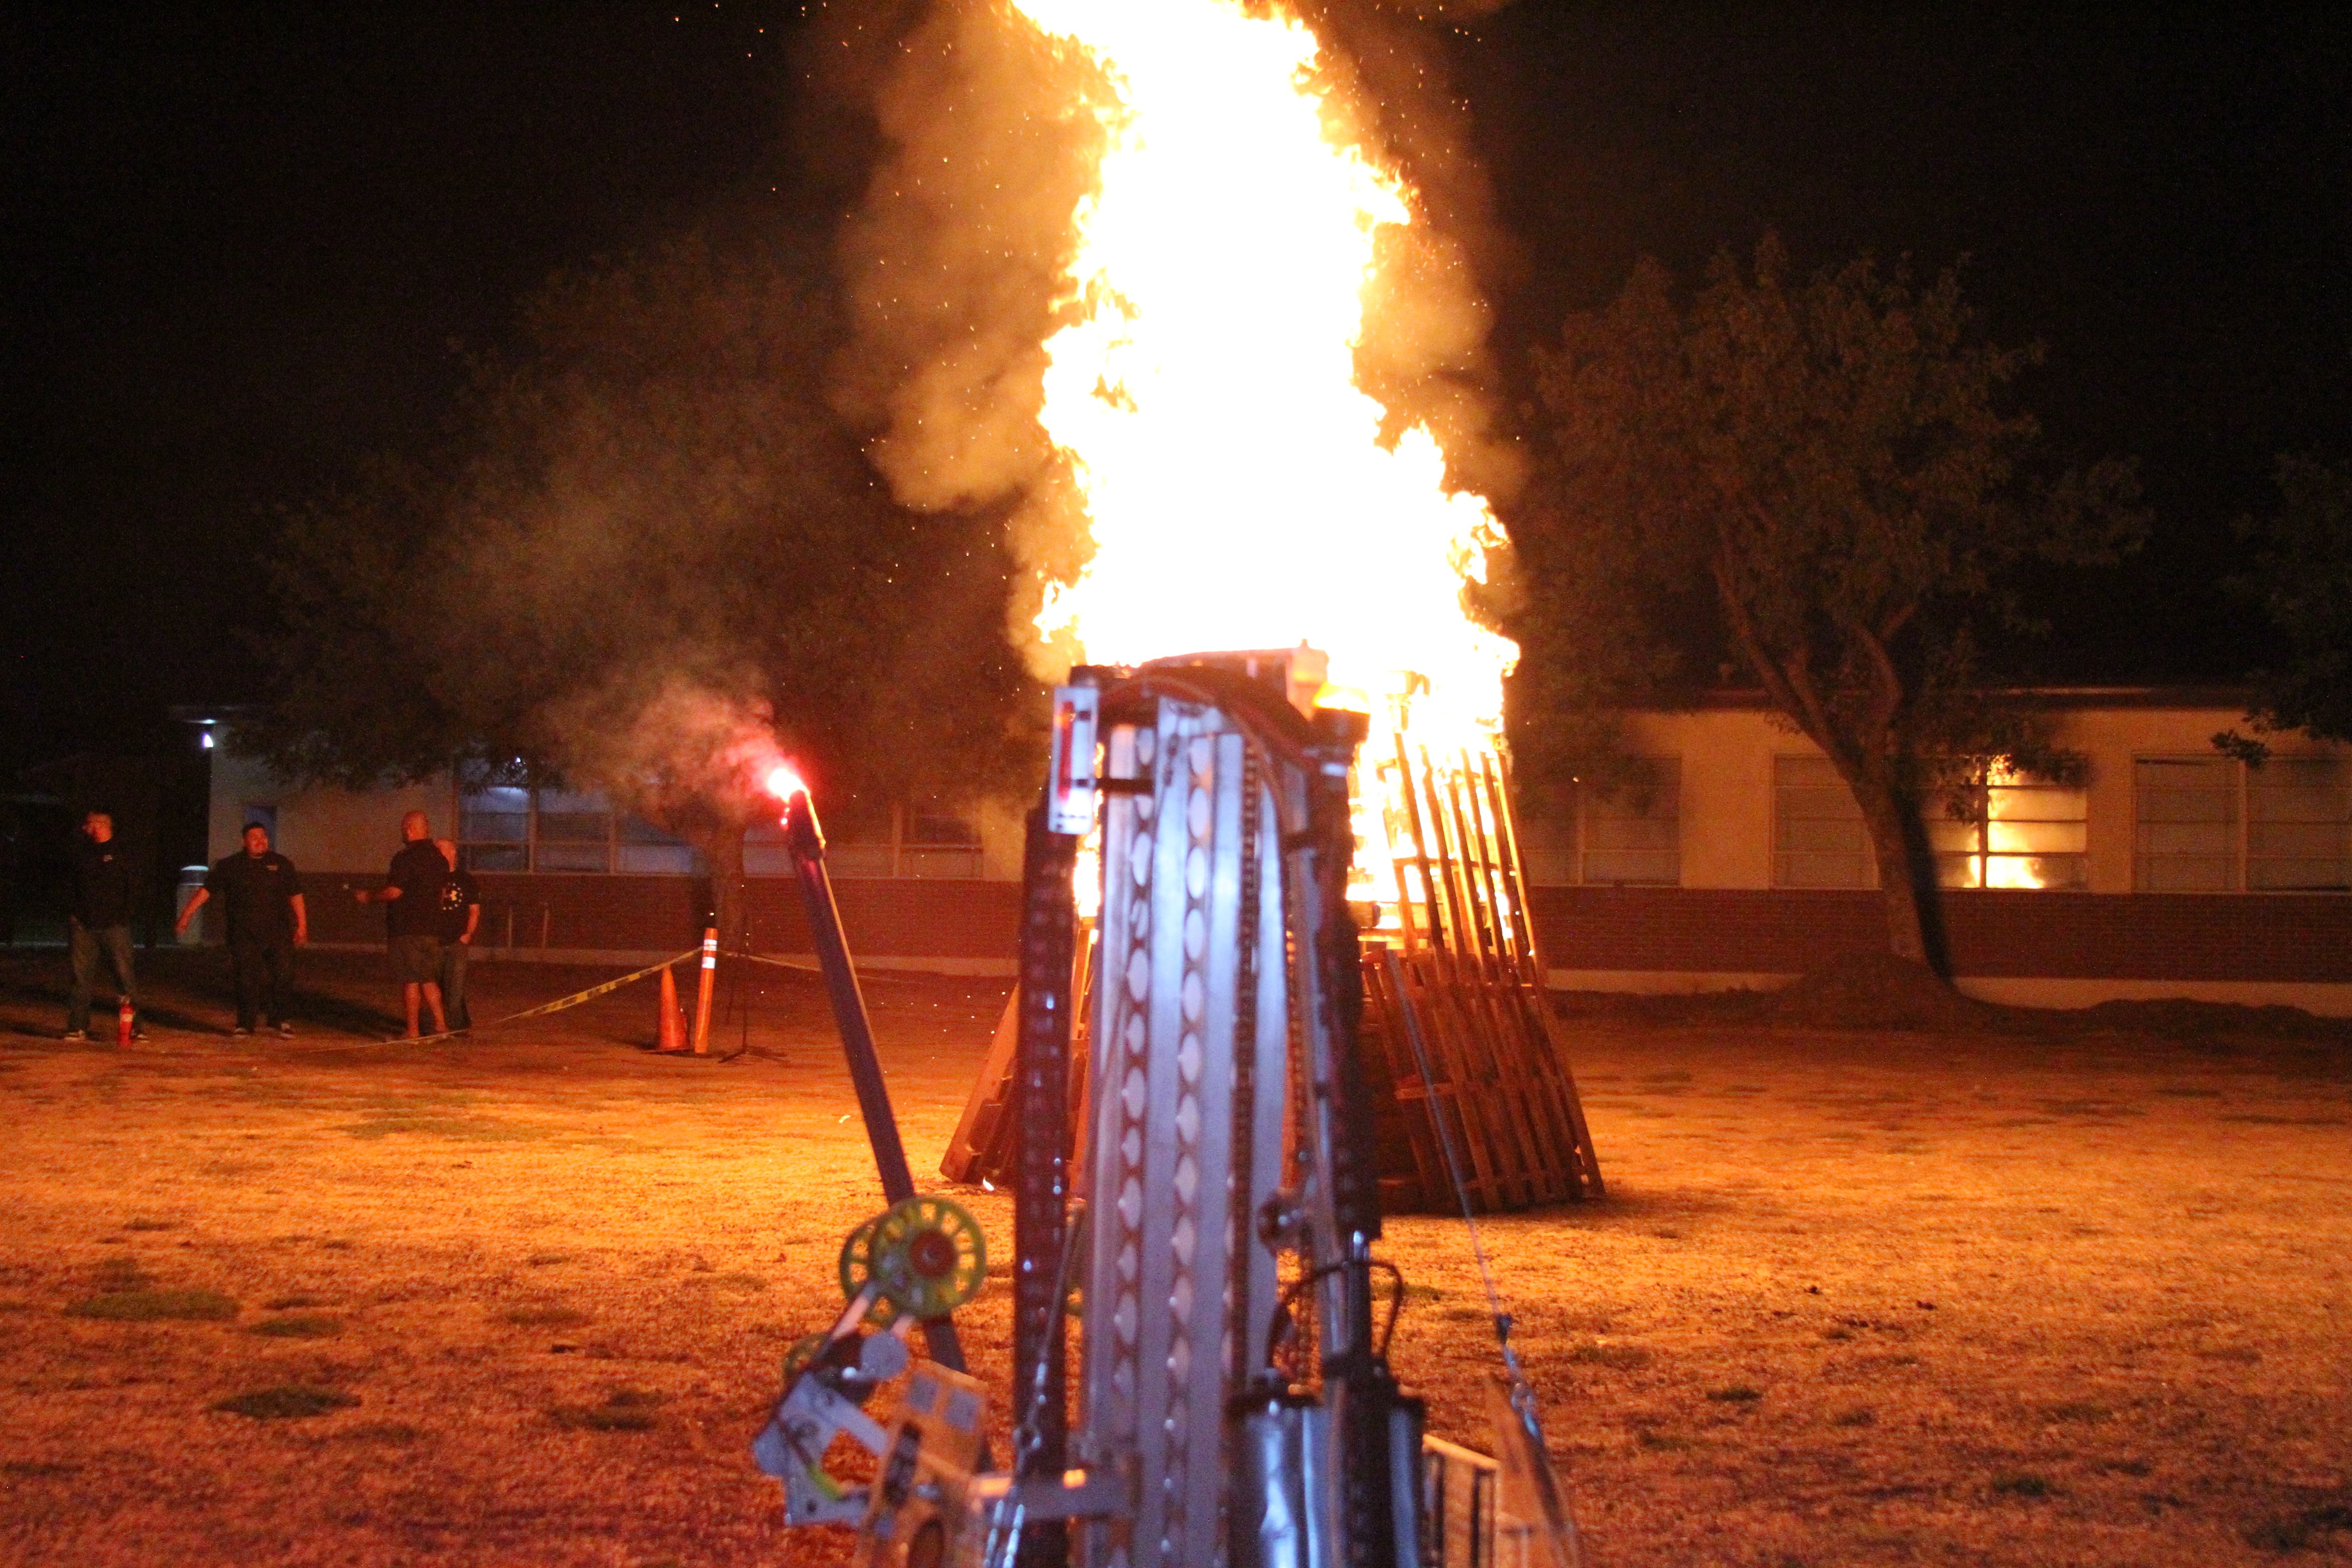 Ya'll ever light the Homecoming Bonfire with an FRC Robot? - CD-Media:  Photos - Chief Delphi